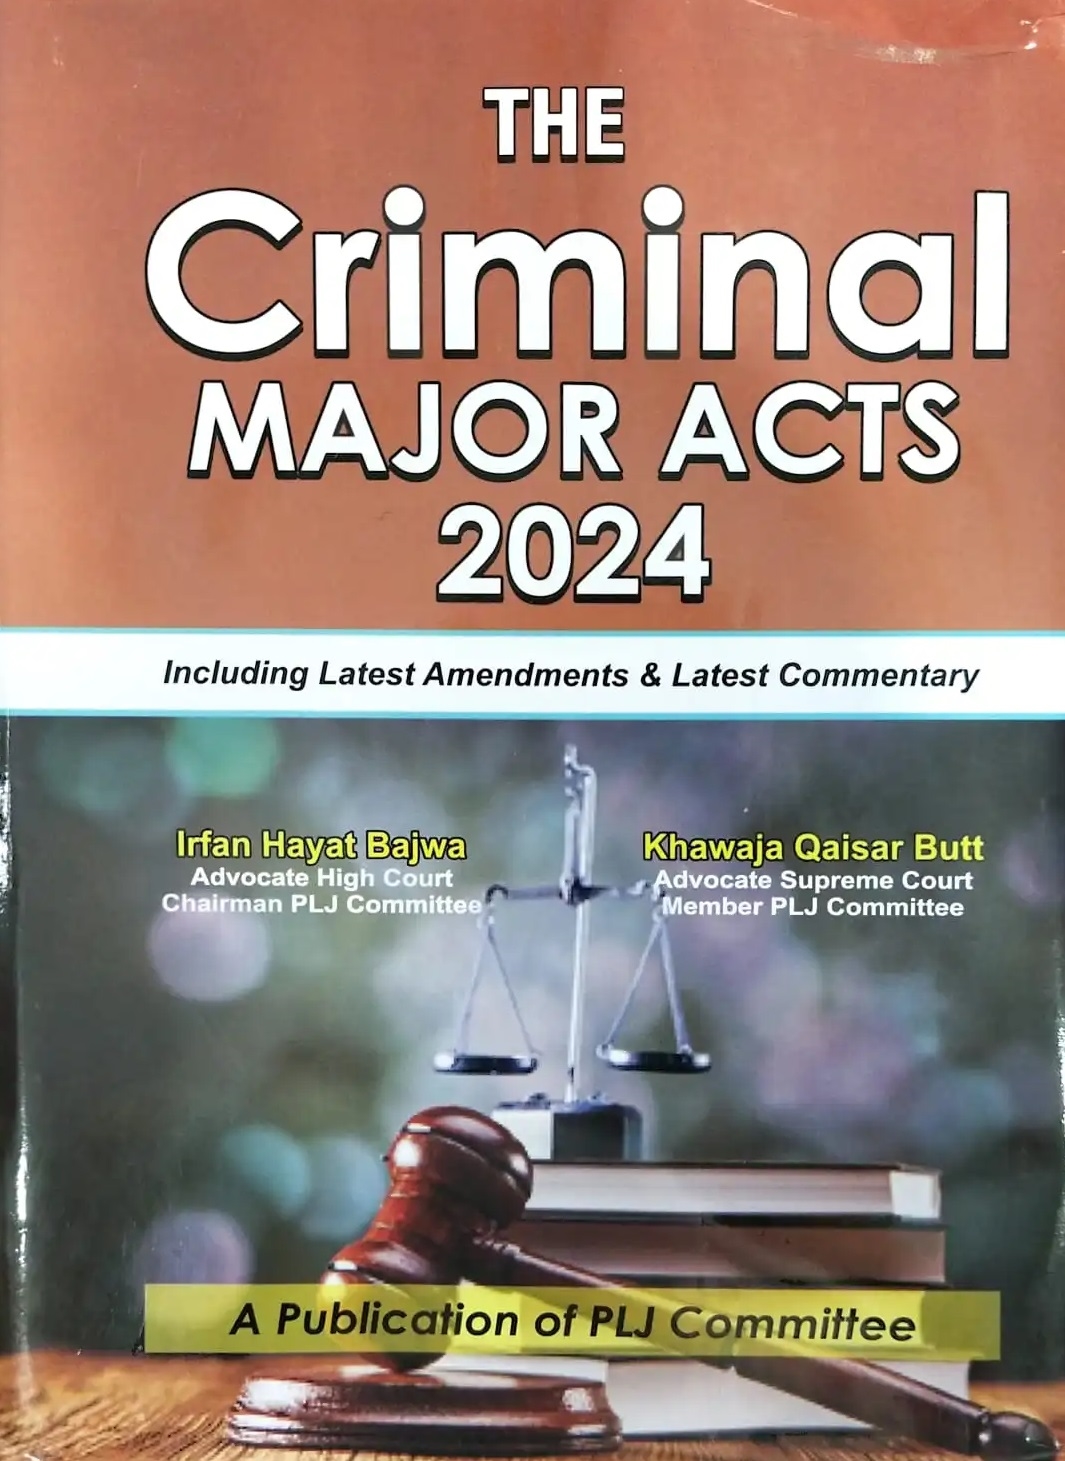 The Criminal Major Acts